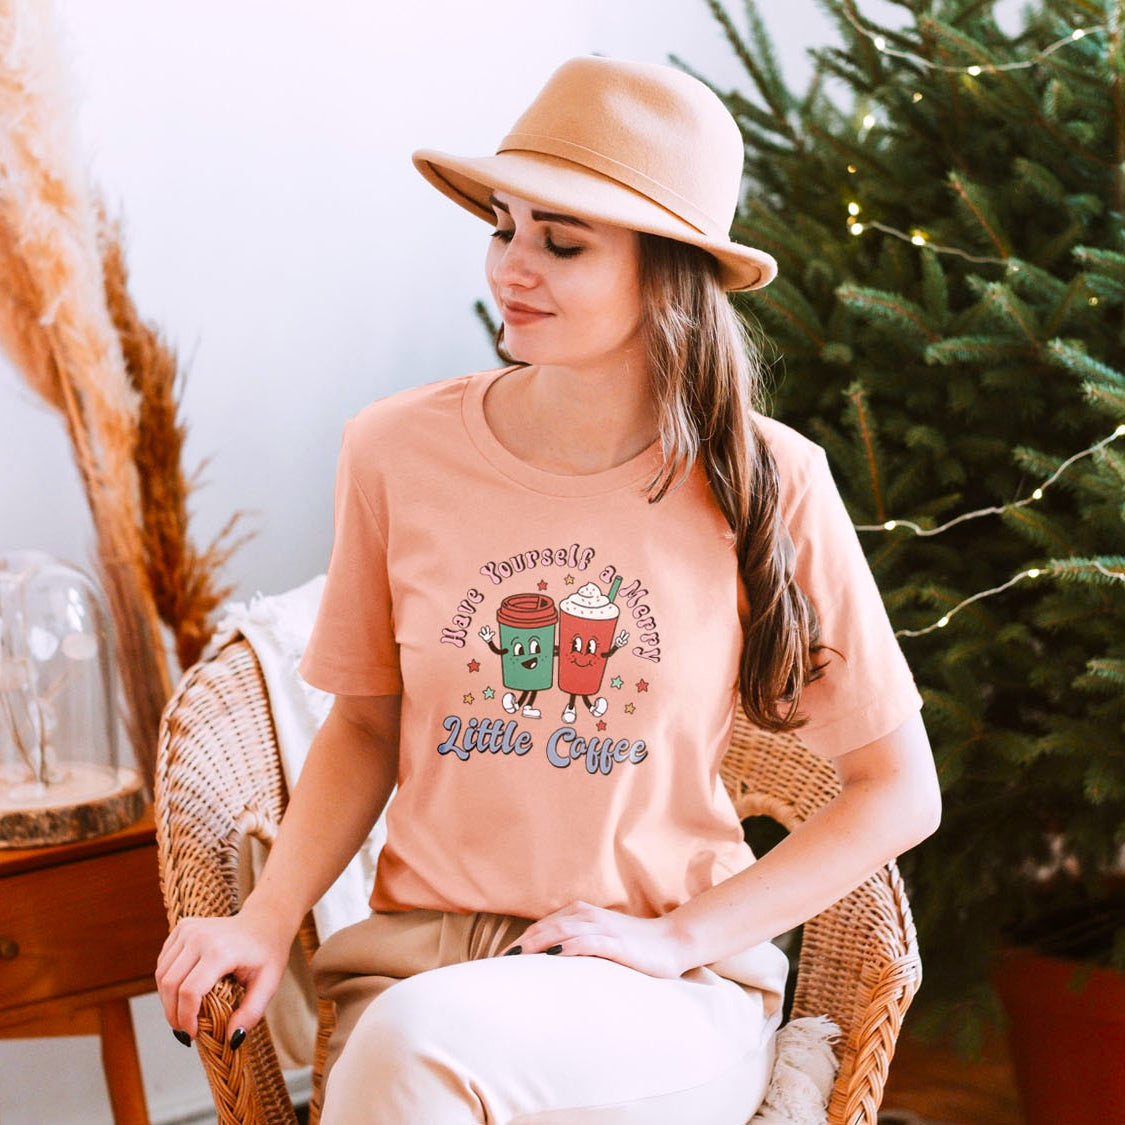 Have Yourself A Merry Little Coffee T-shirt - Christmas Winter Retro Vintage Design Printed Tee Shirt